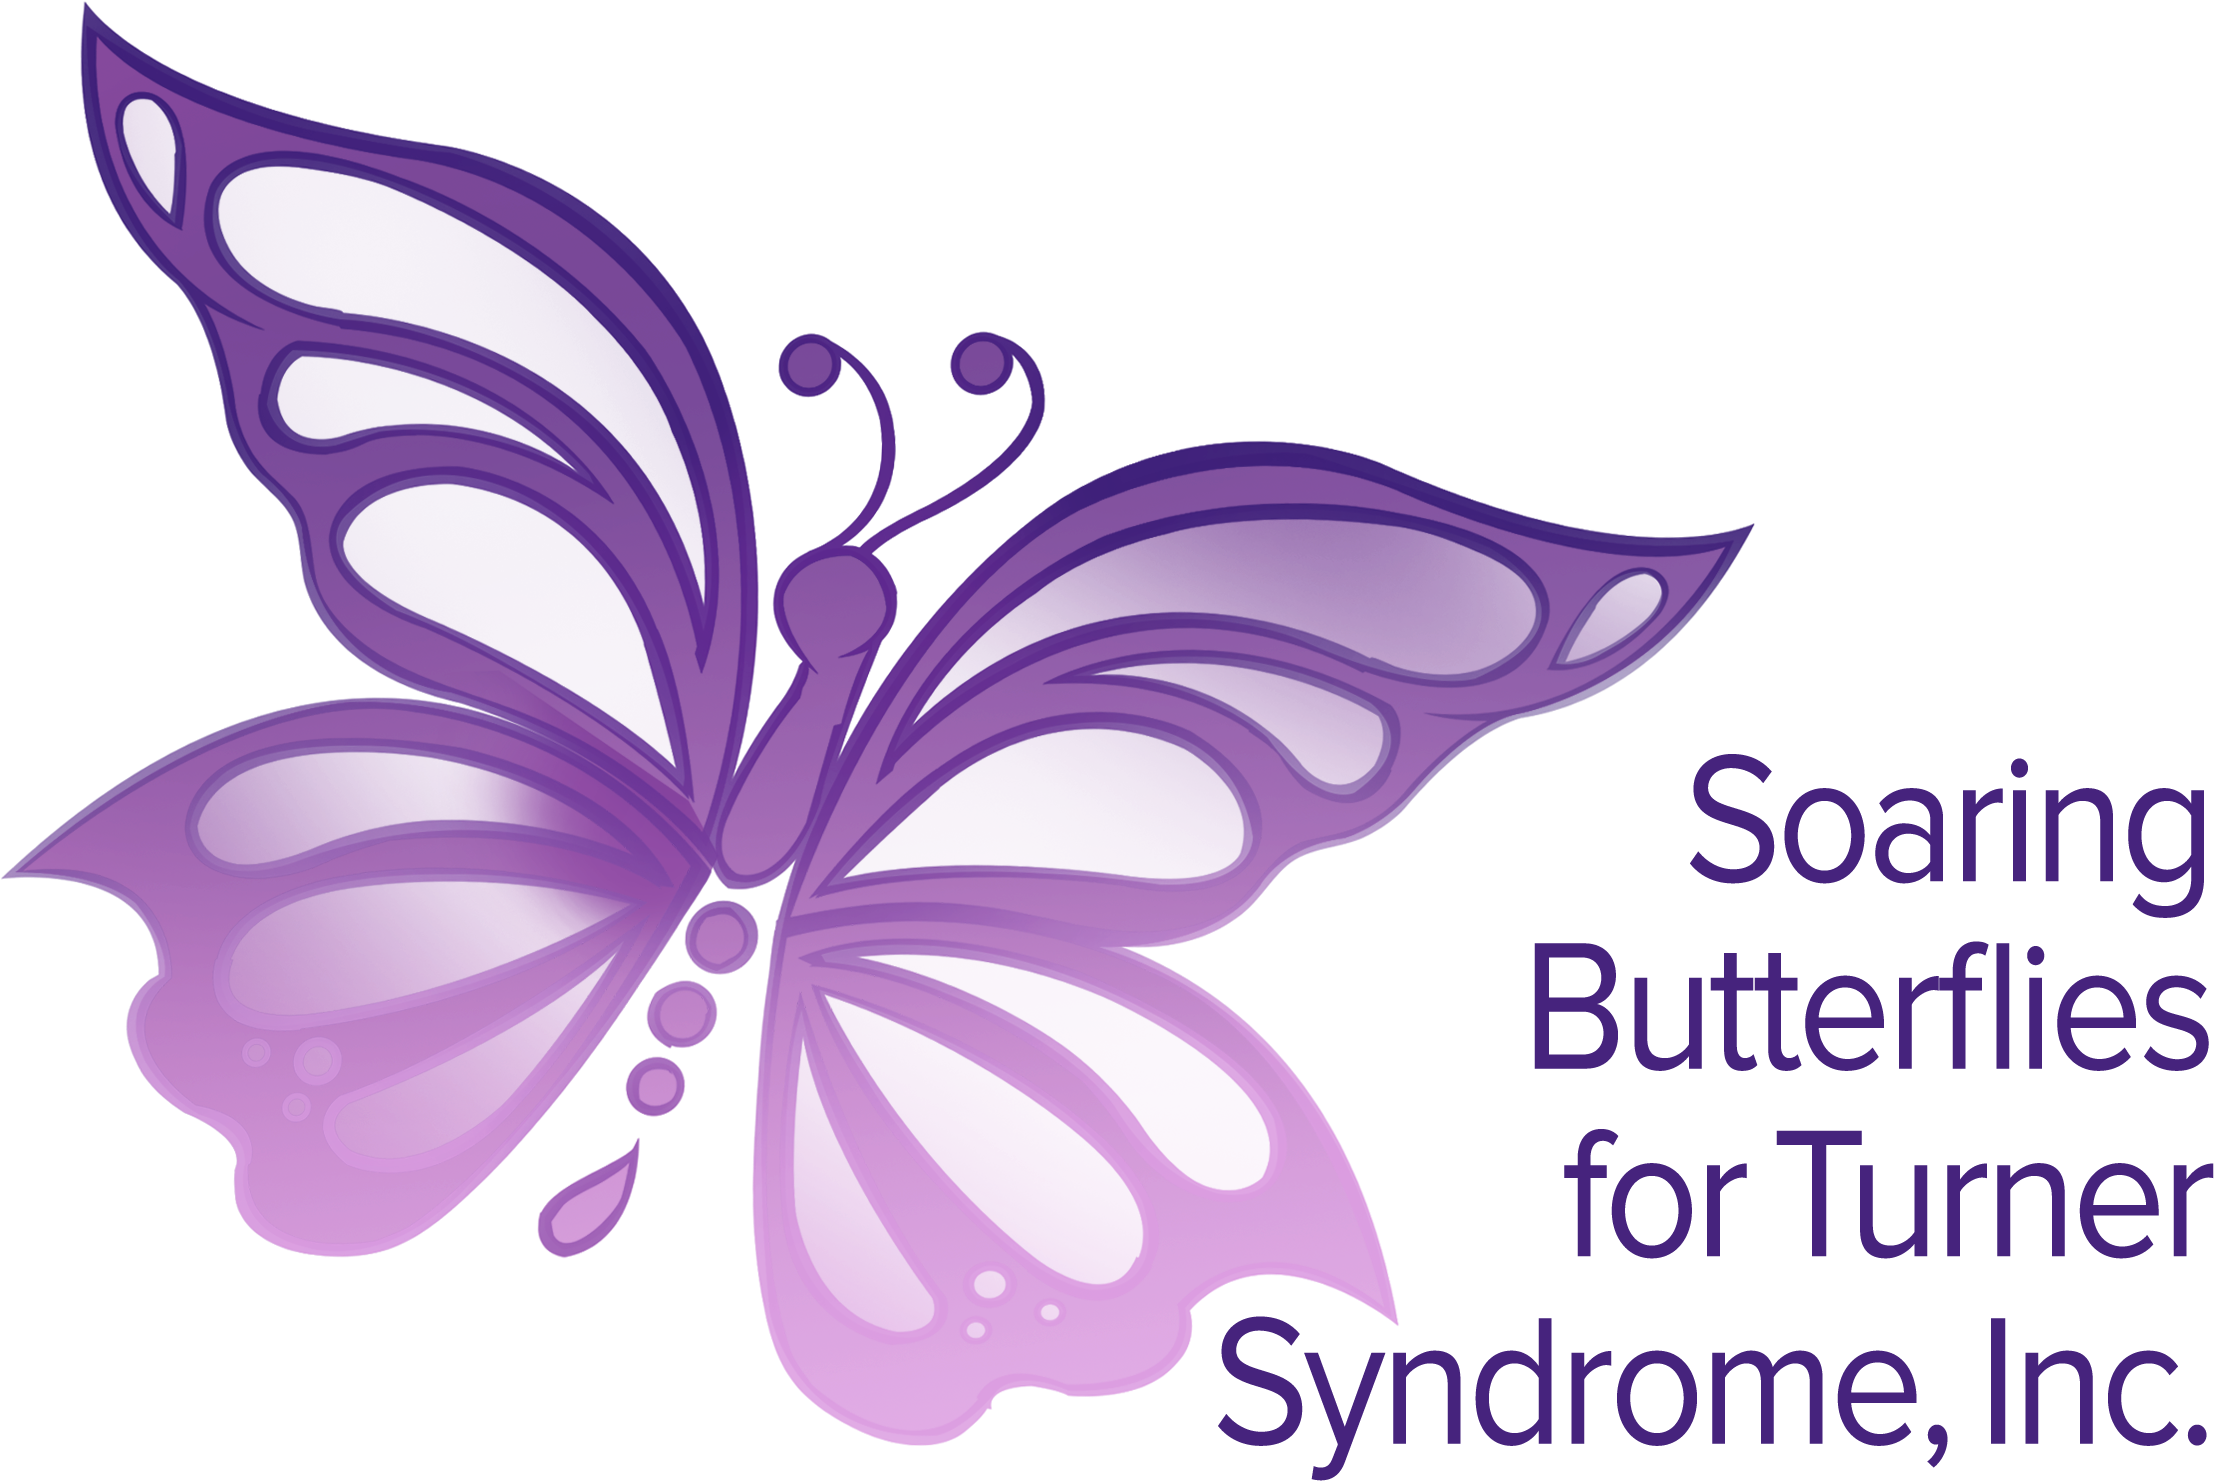 Toggle Navigation - Turner's Syndrome Butterfly (2322x1557)